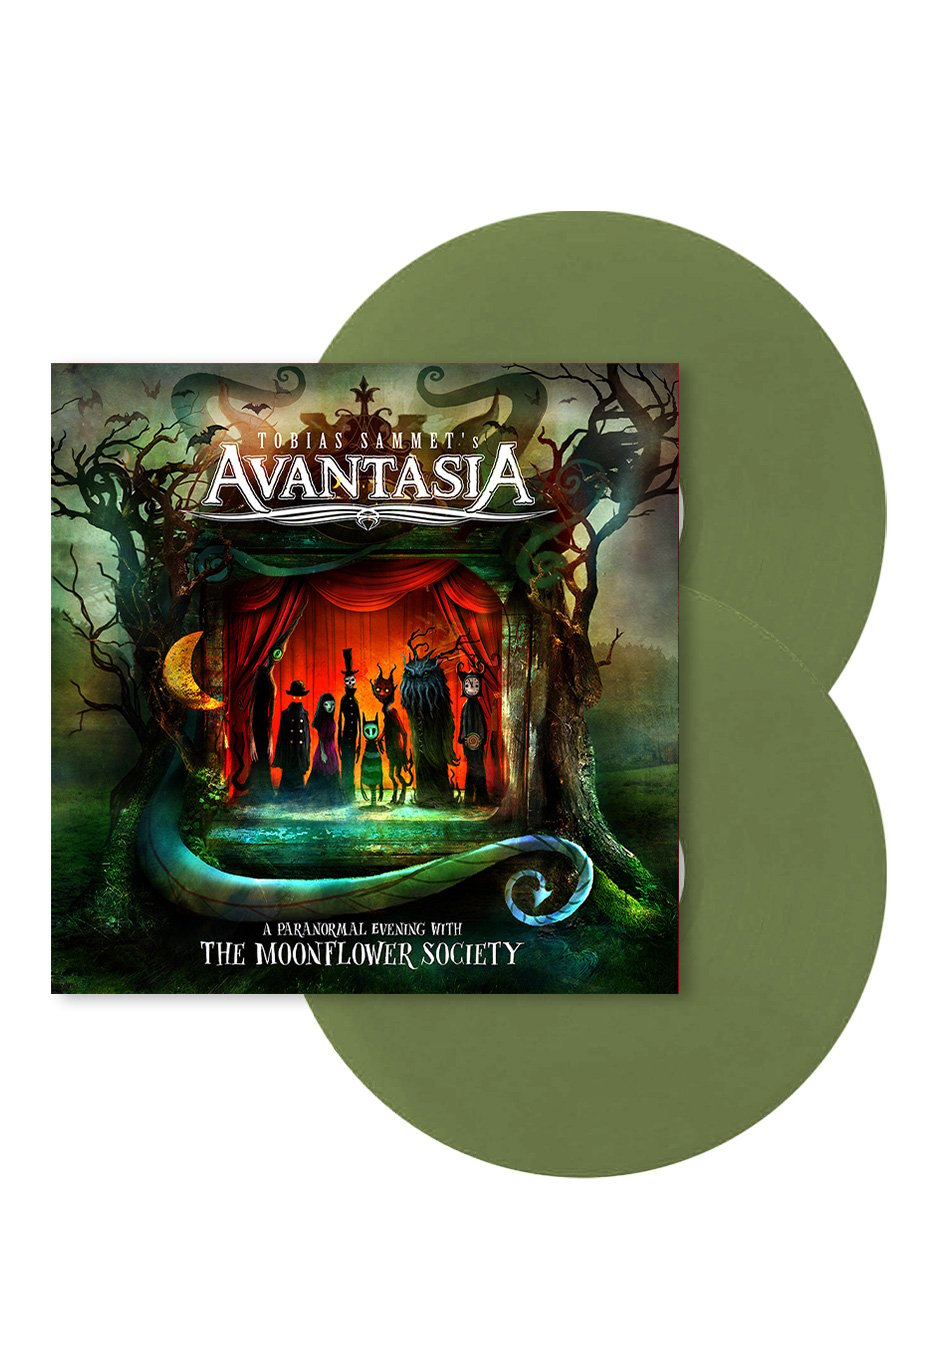 Avantasia - A Paranormal Evening With The Moonflower Society Ltd. Moonstone - Colored 2 Vinyl